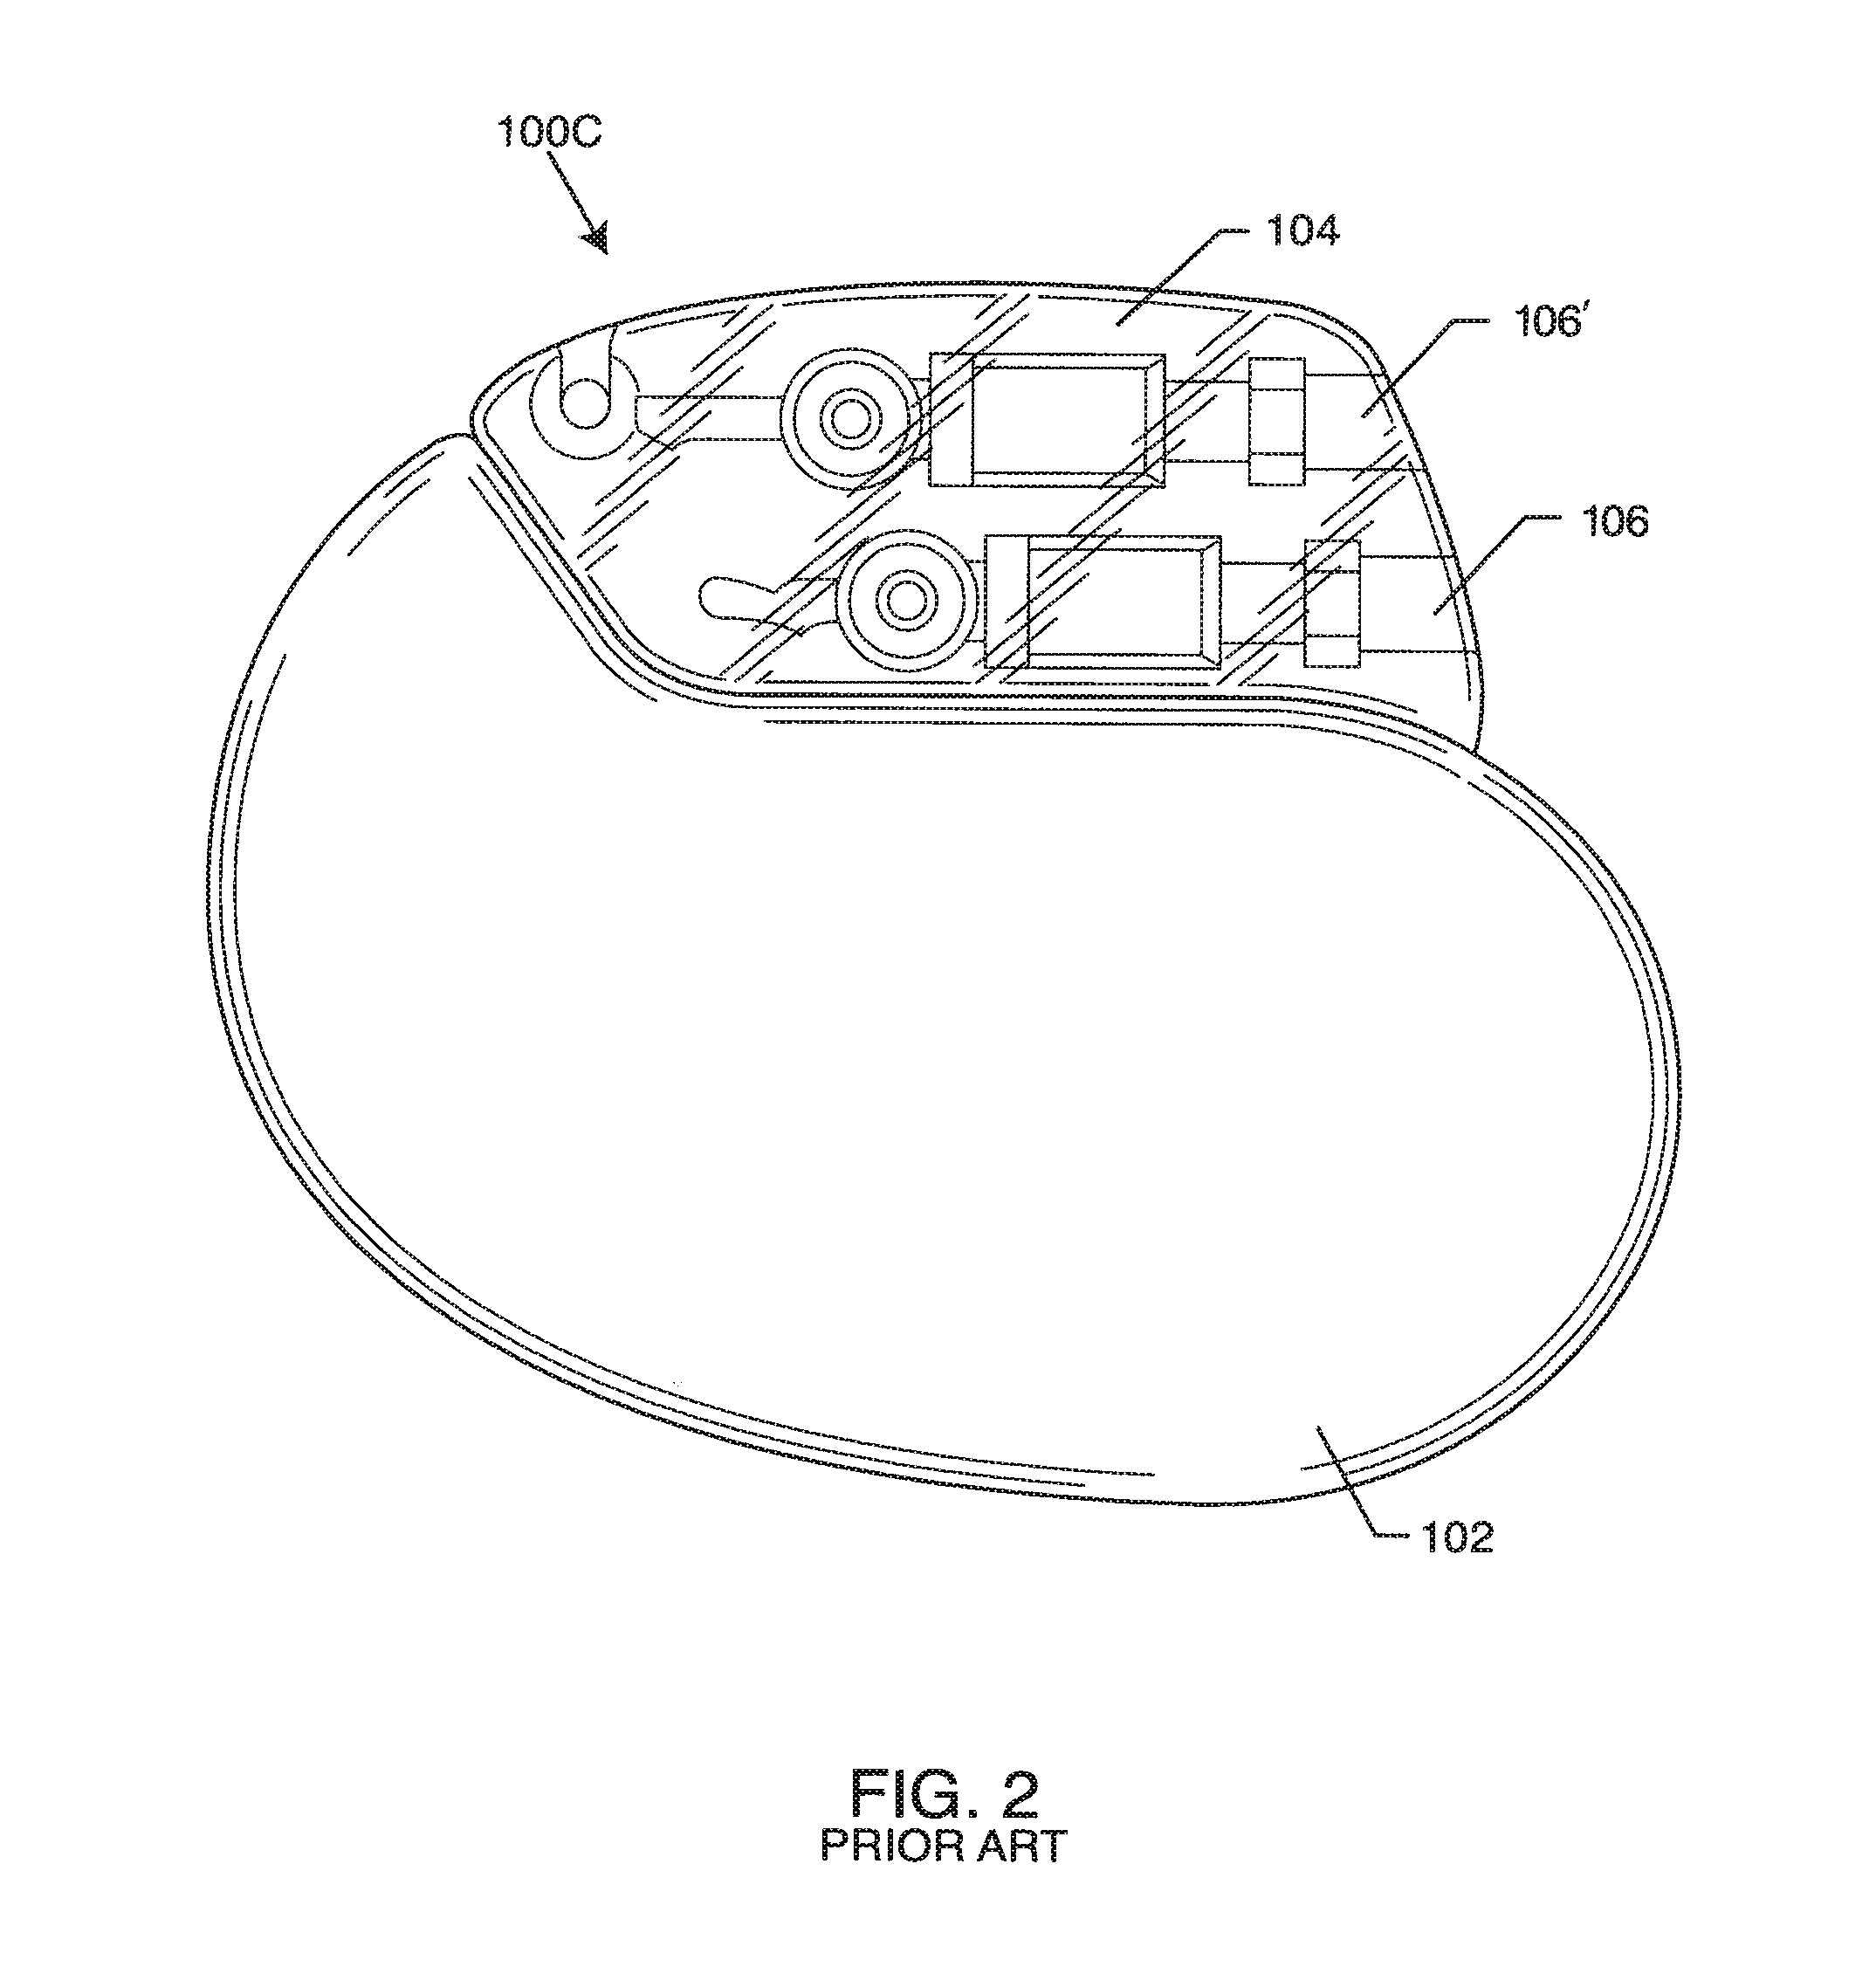 Elevated Hermetic Feedthrough Insulator Adapted for Side Attachment of Electrical Conductors on the Body Fluid Side of an Active Implantable Medical Device